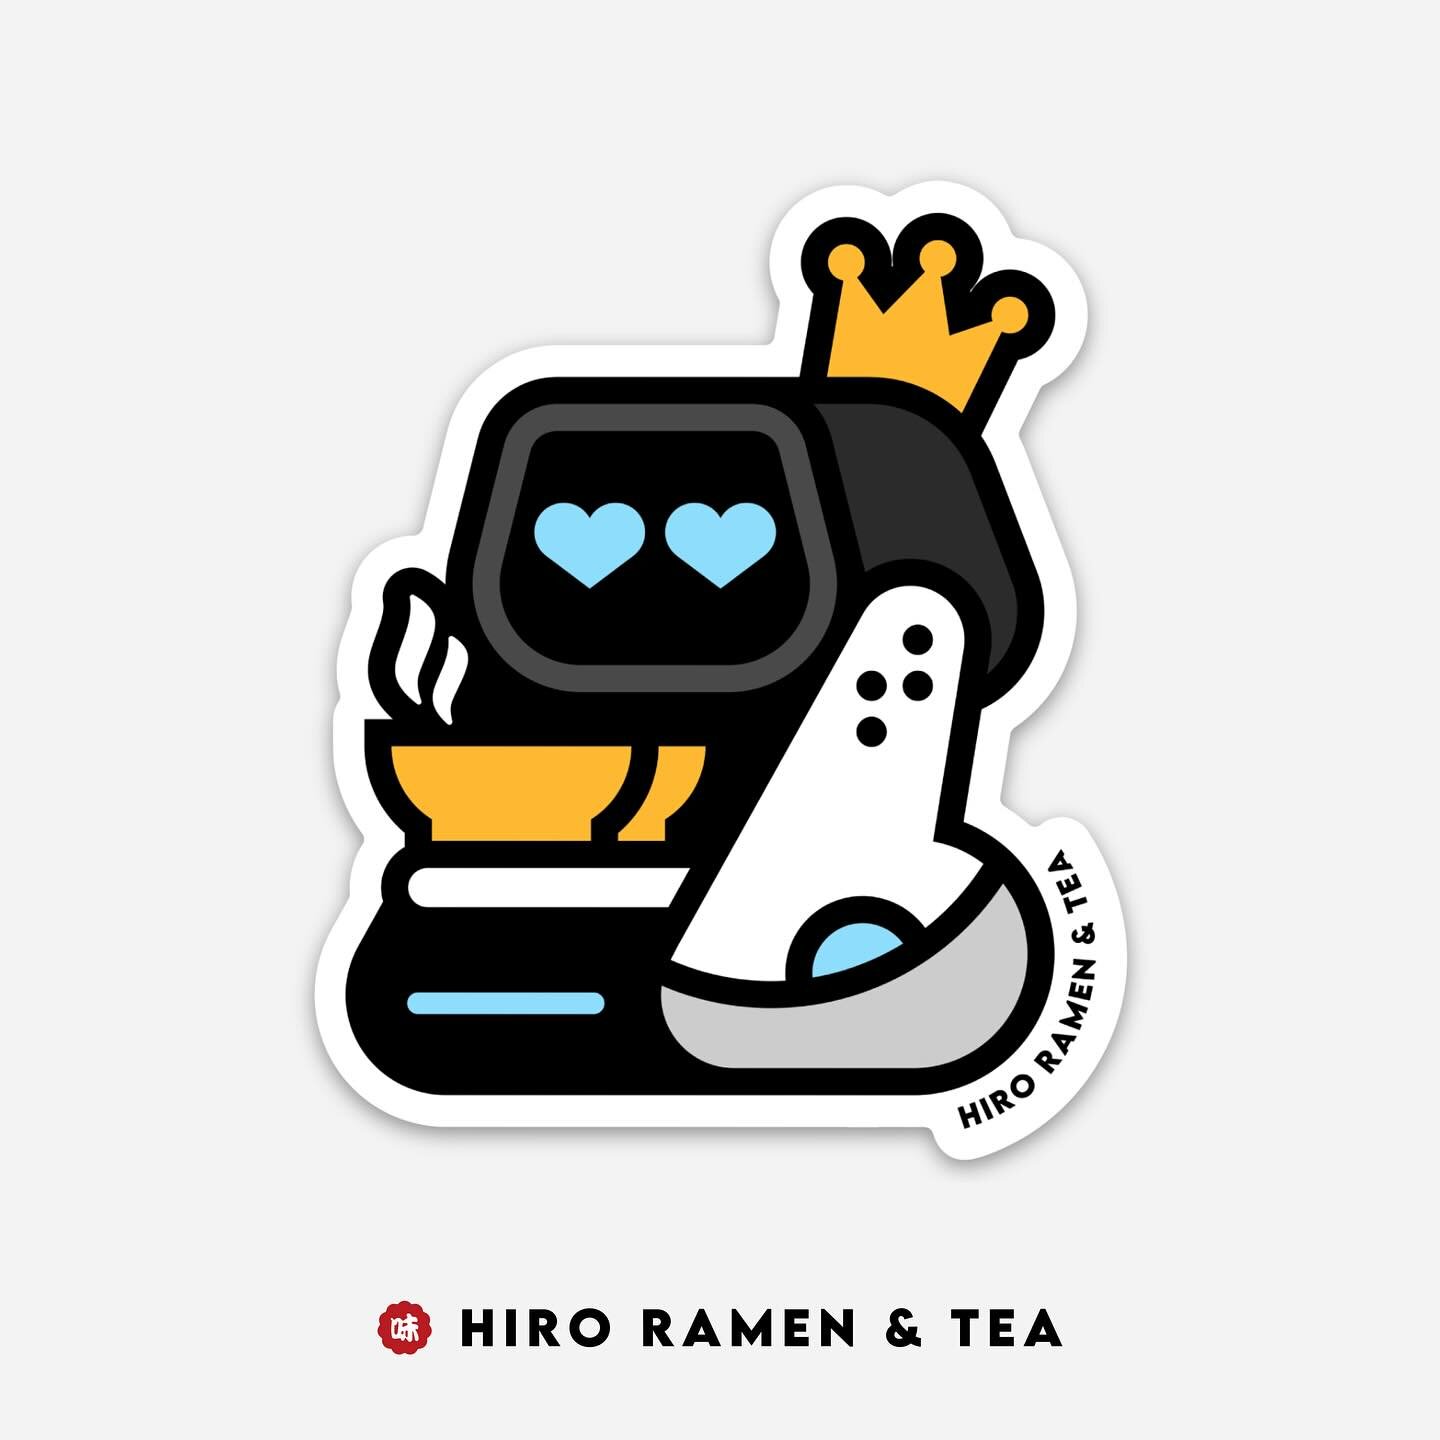 We&rsquo;ve got two new stickers in our shop starting today! First, a TARS sticker! And second, a commission design by @nolen.lee called, &ldquo;Sola &amp; TARS.&rdquo; Stop by today and pick one up! ❤️❤️❤️. 

#columbusohio #asseenincolumbus #ramen #